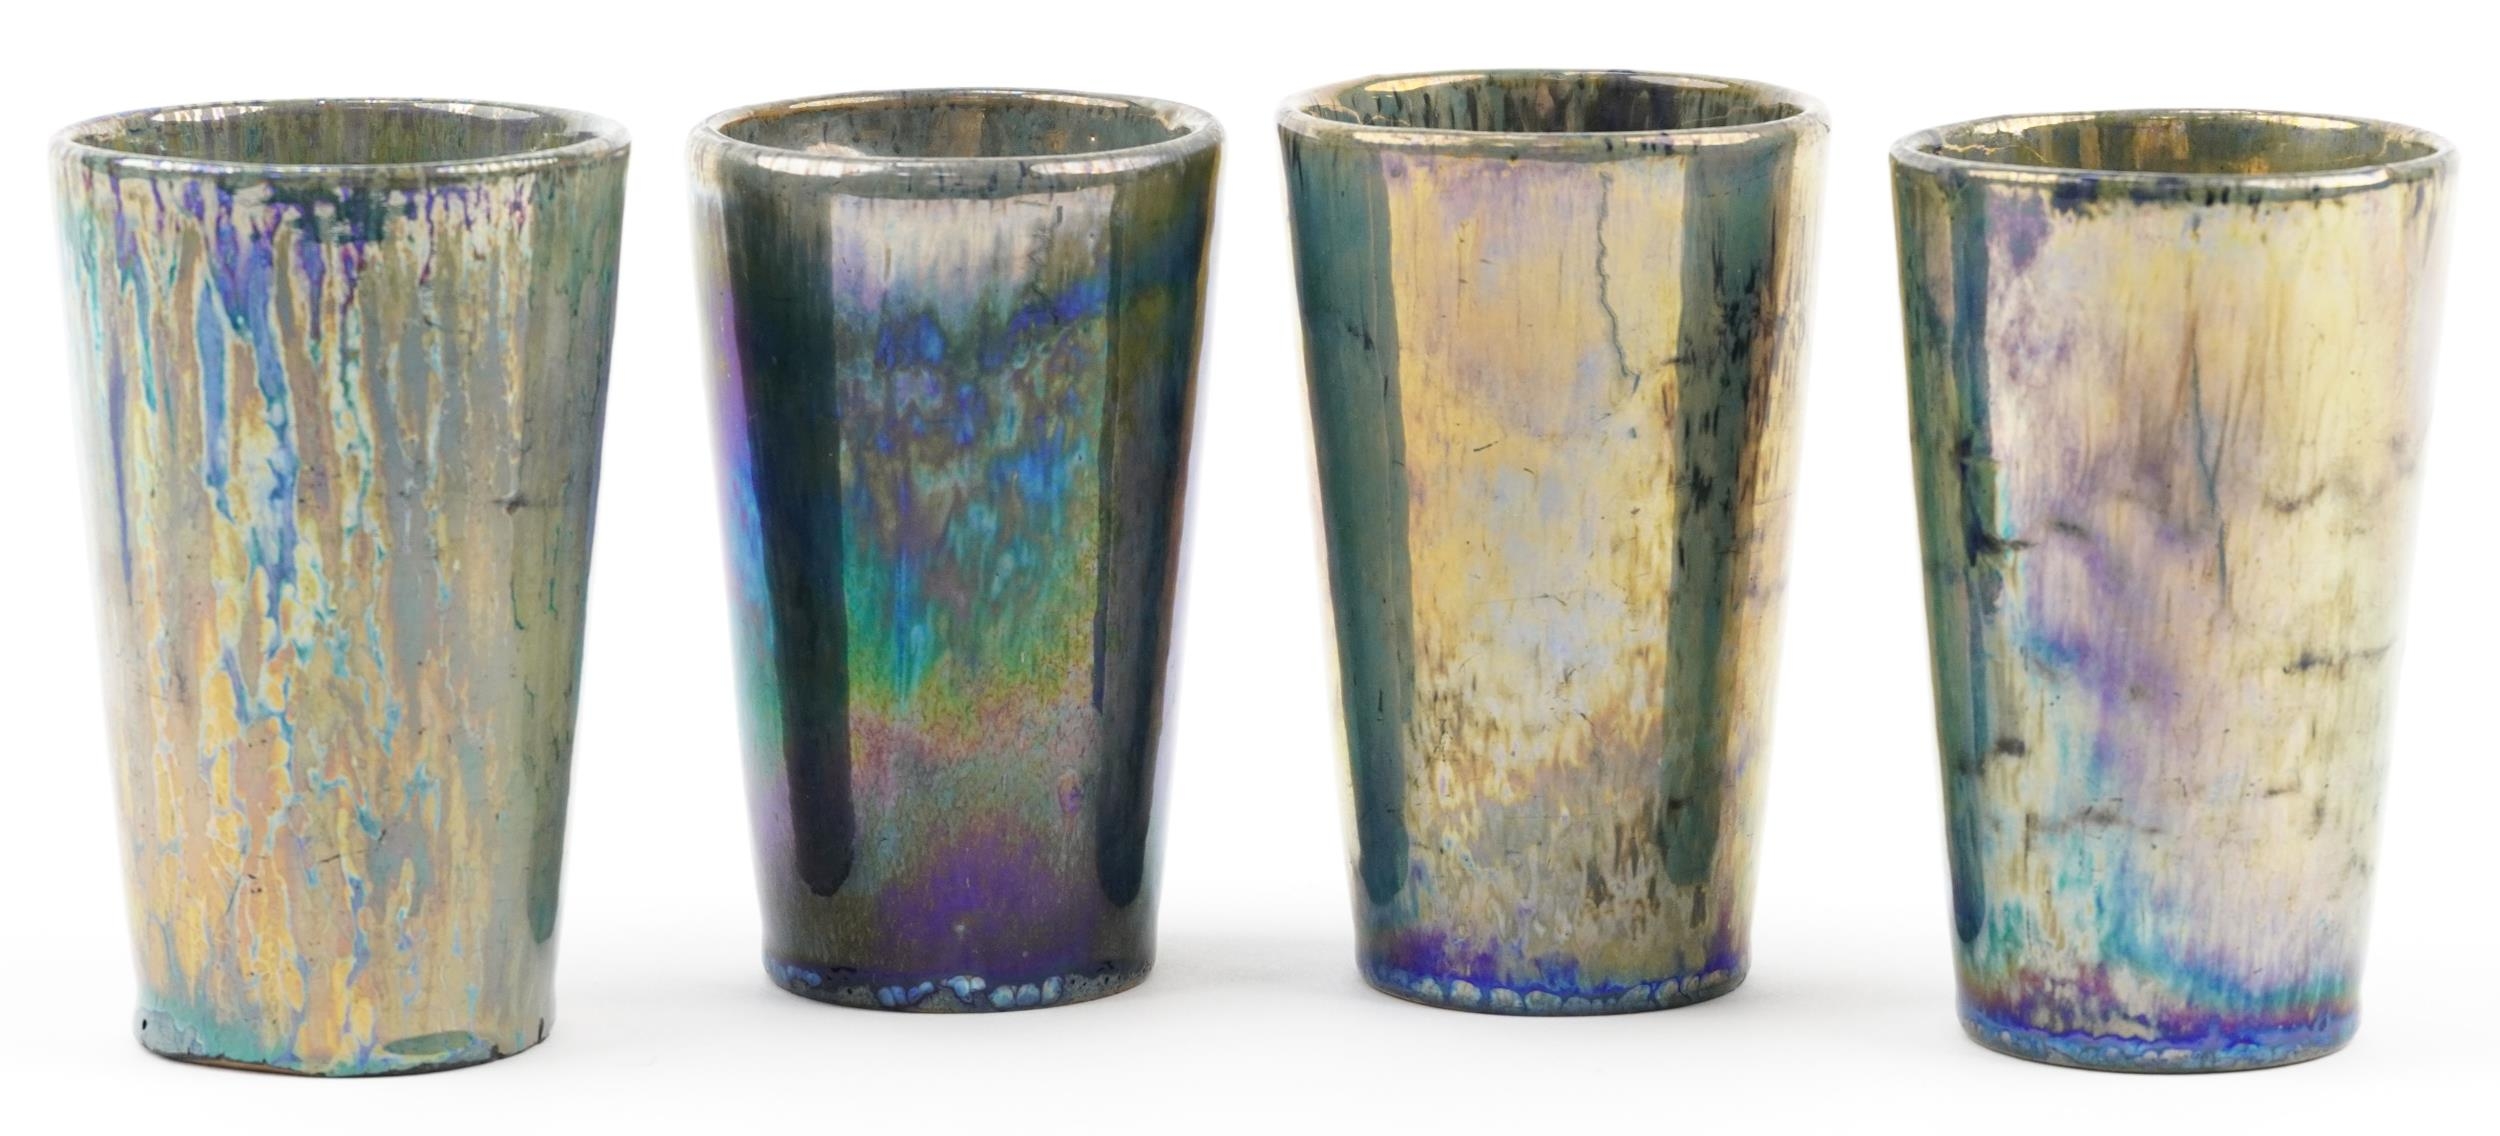 Alphonse Cytere-Rambervillers, set of four French pottery beakers having iridescent green and blue